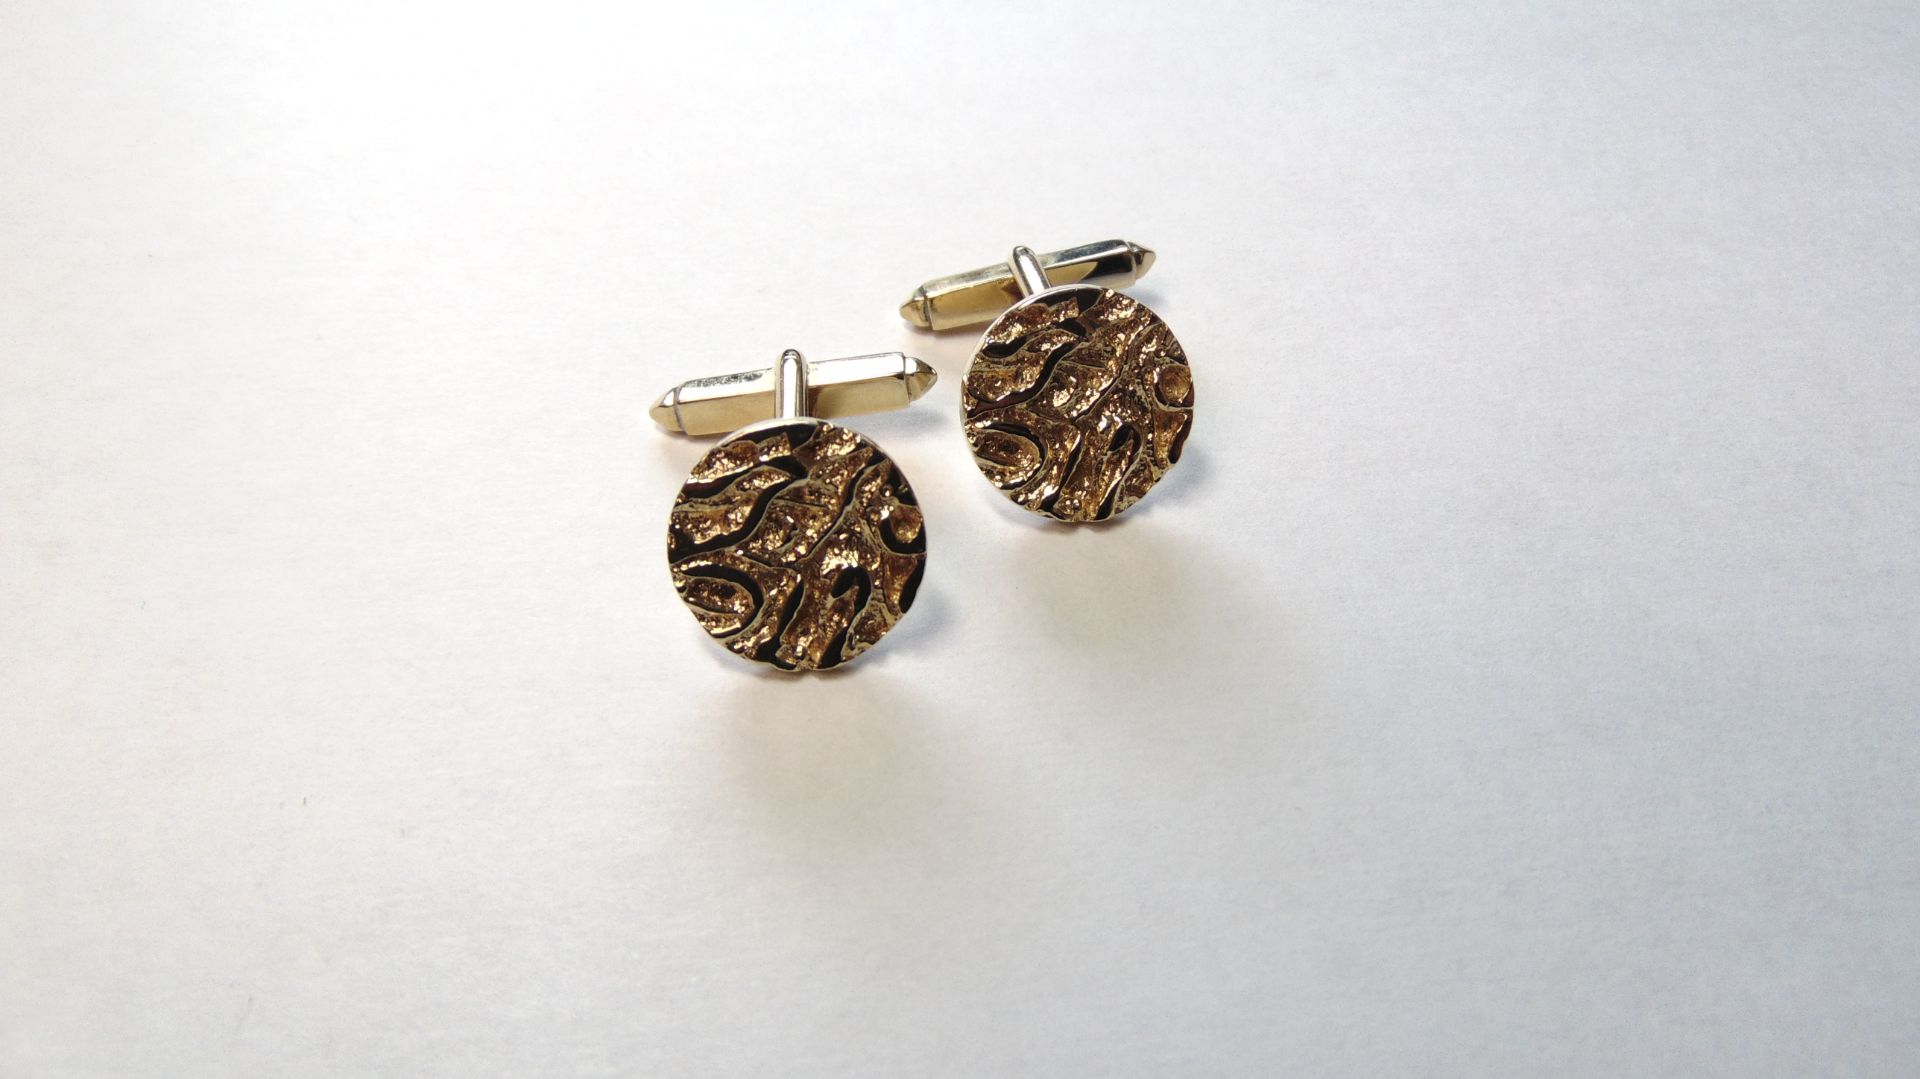 Vintage 9ct Yellow Gold Patterned Cufflinks